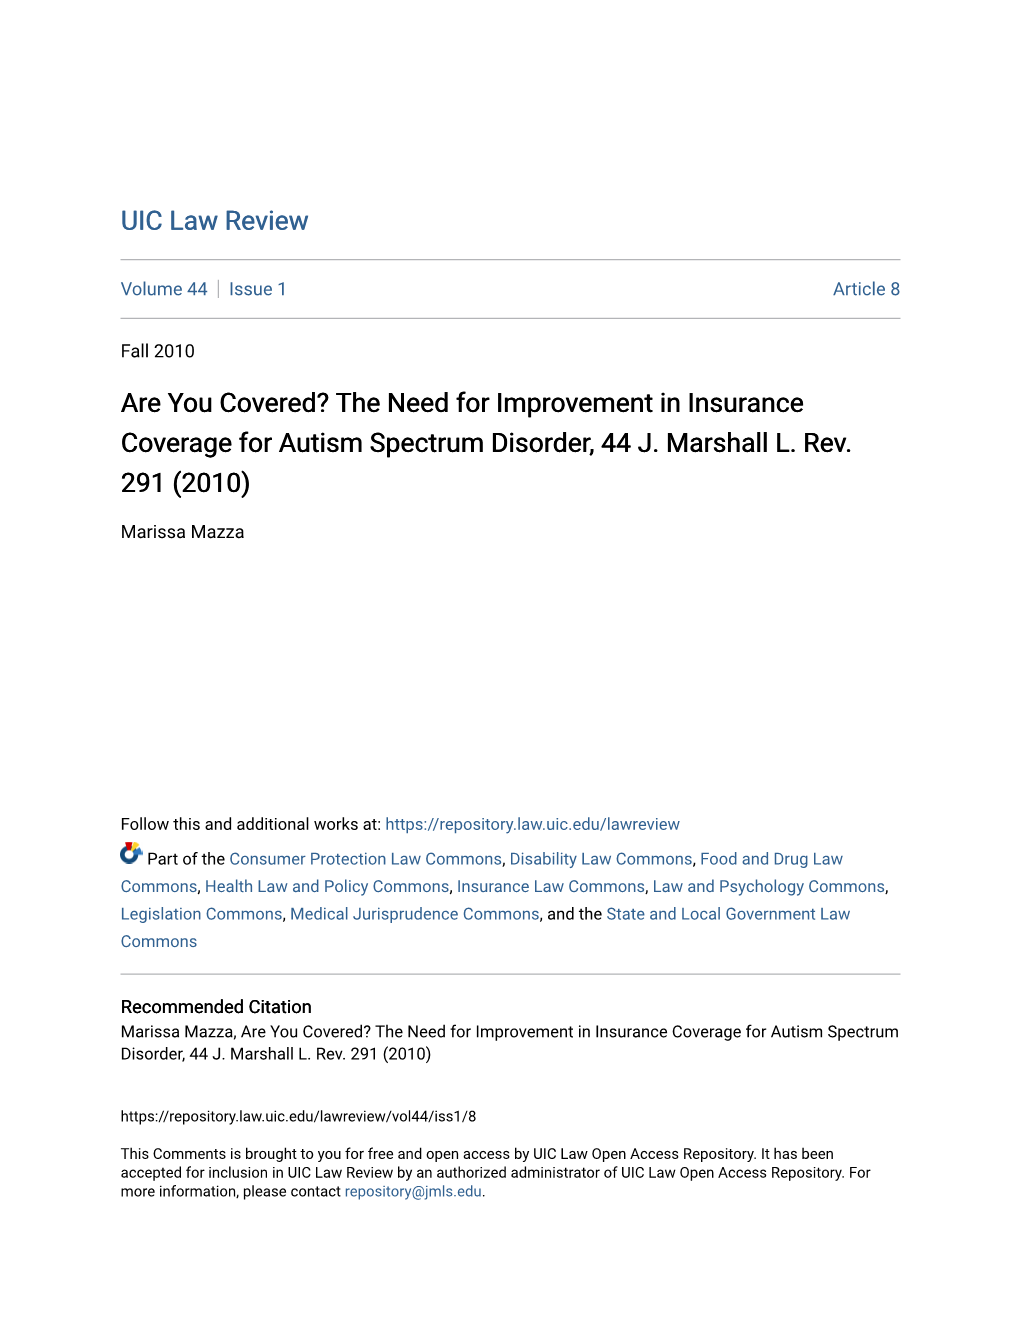 The Need for Improvement in Insurance Coverage for Autism Spectrum Disorder, 44 J